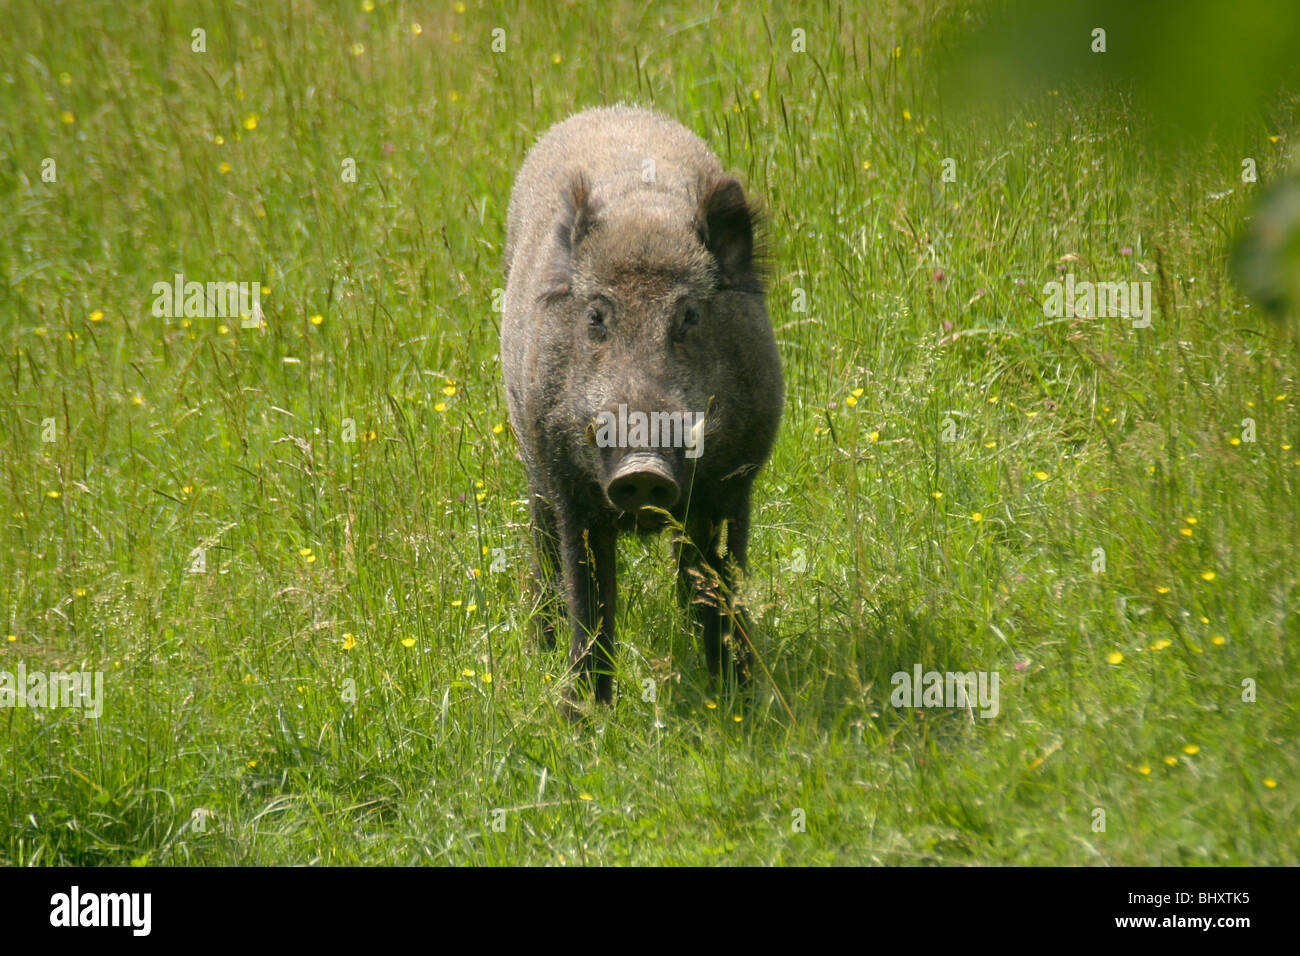 Wild pig on a meadow Stock Photo